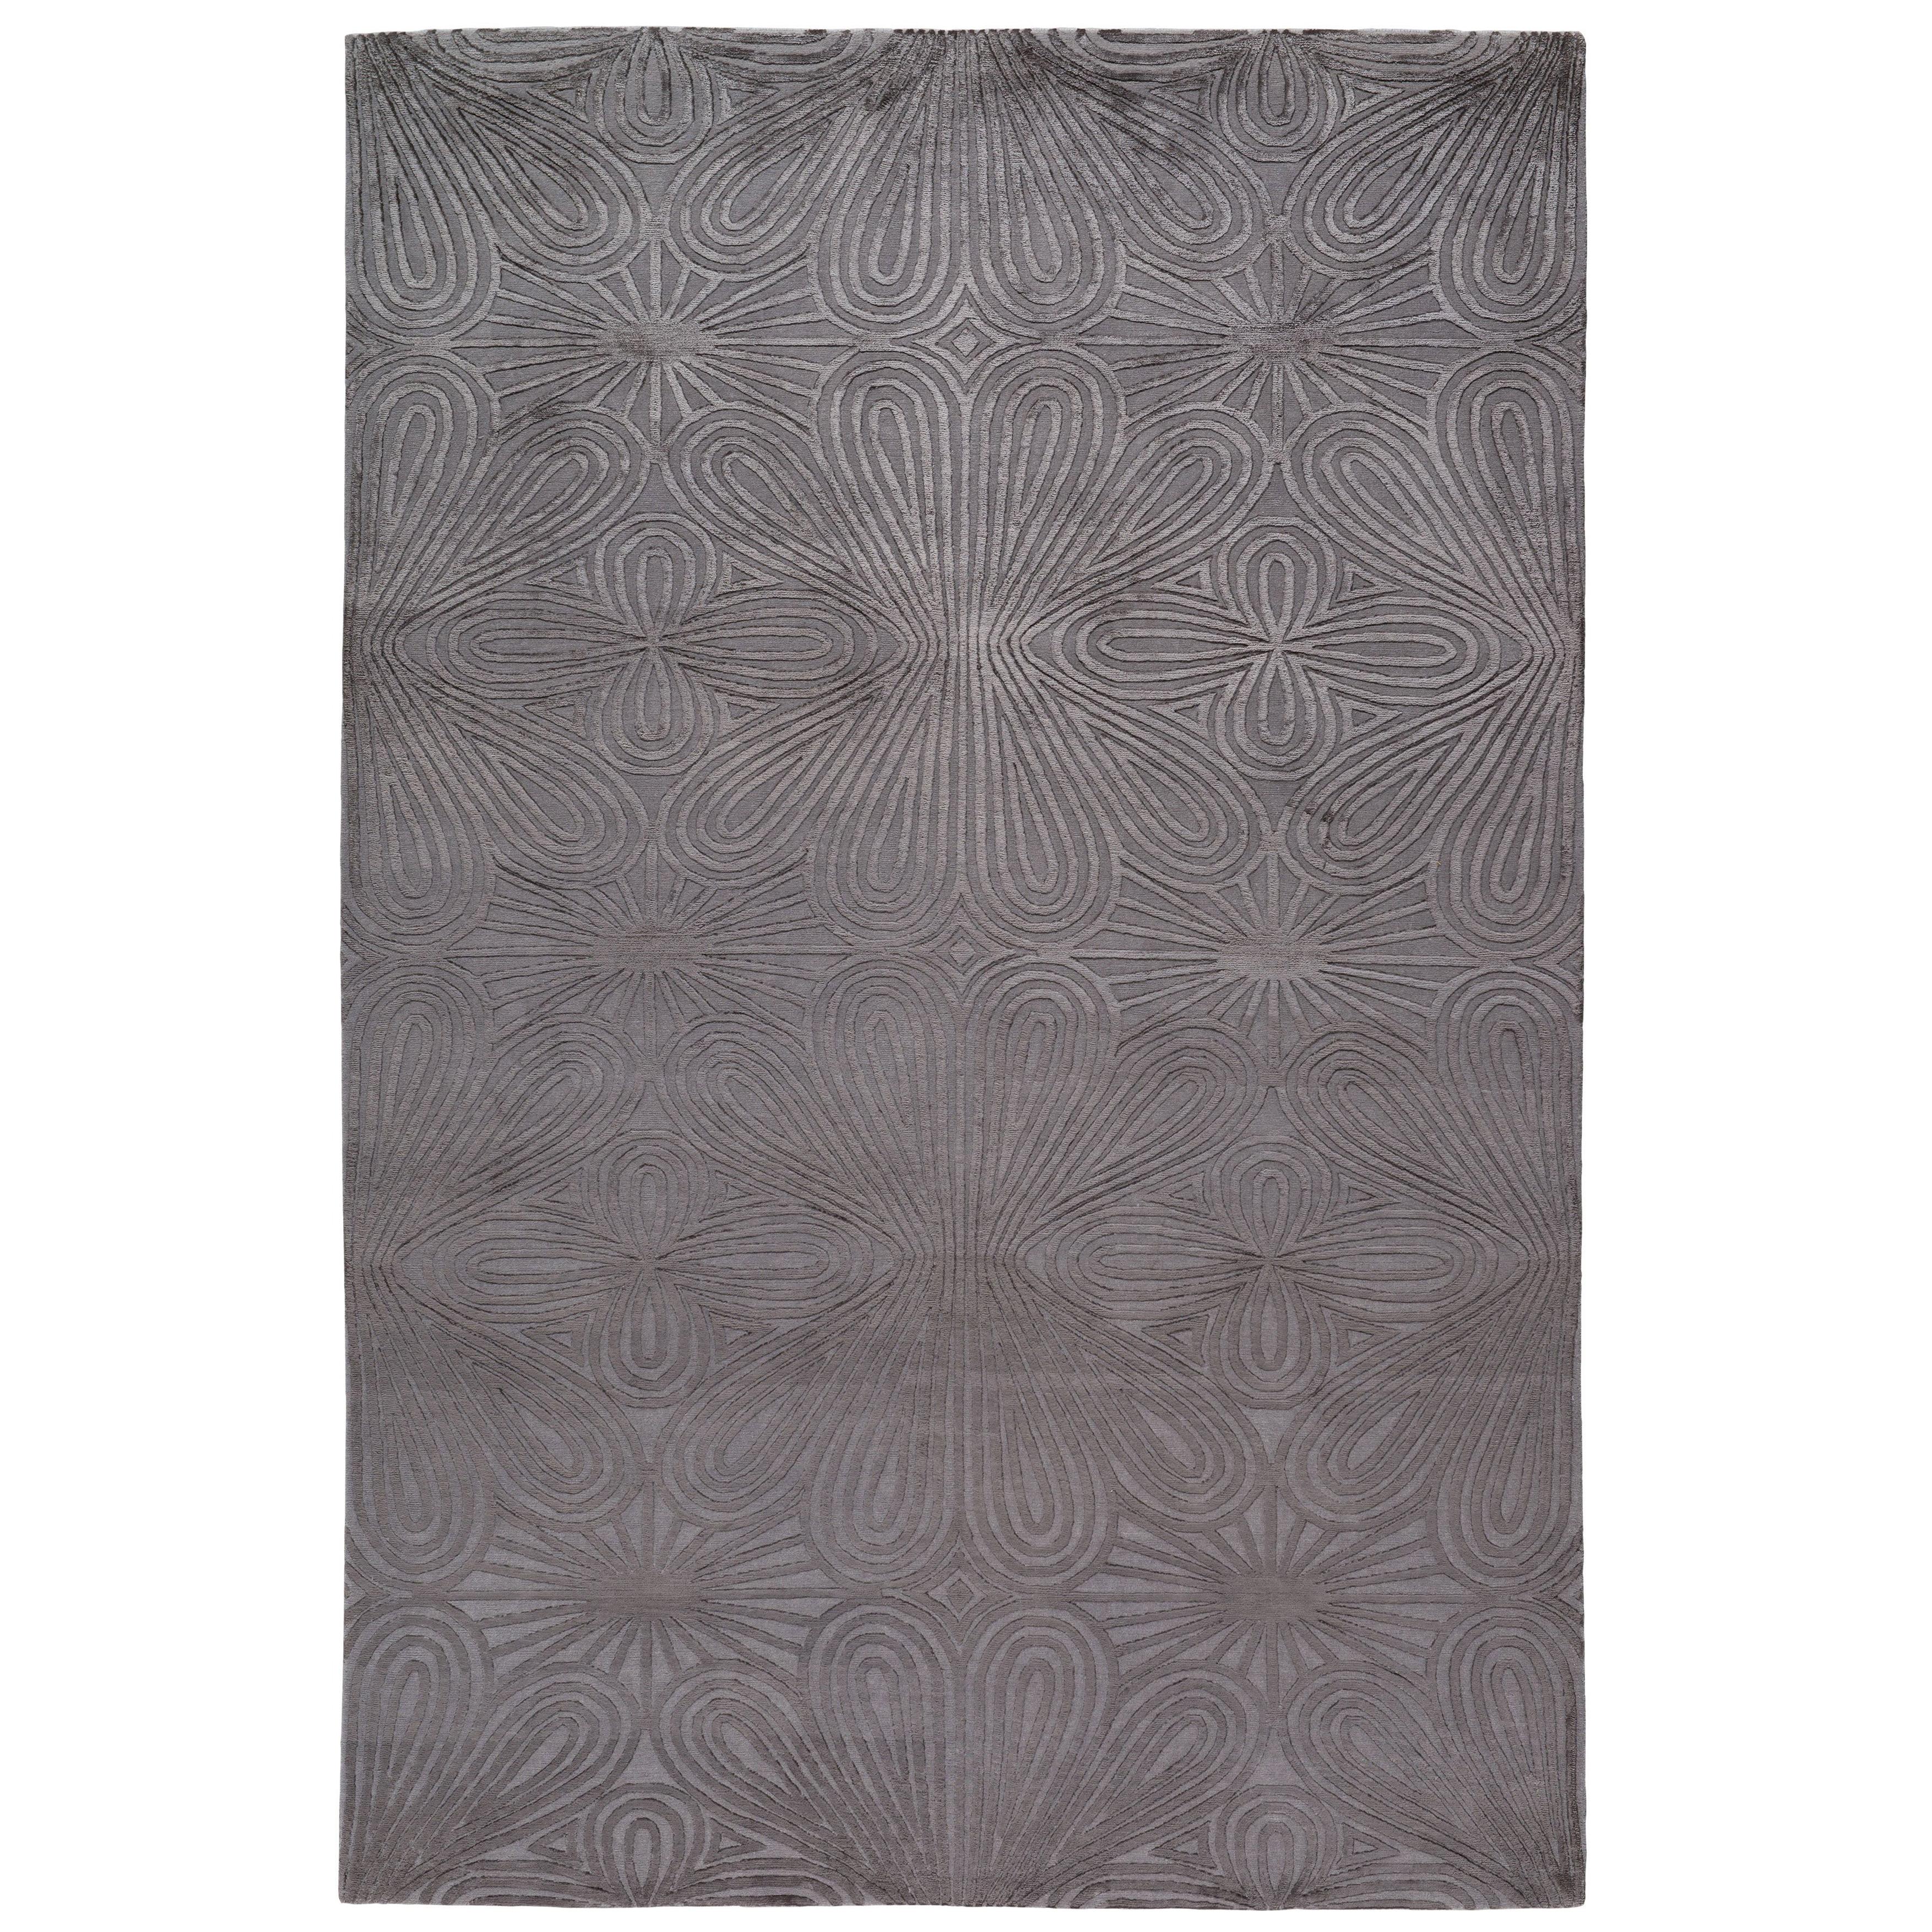 Filigree Hand-Knotted 10x8 Rug in Wool and Silk by Christopher Kane